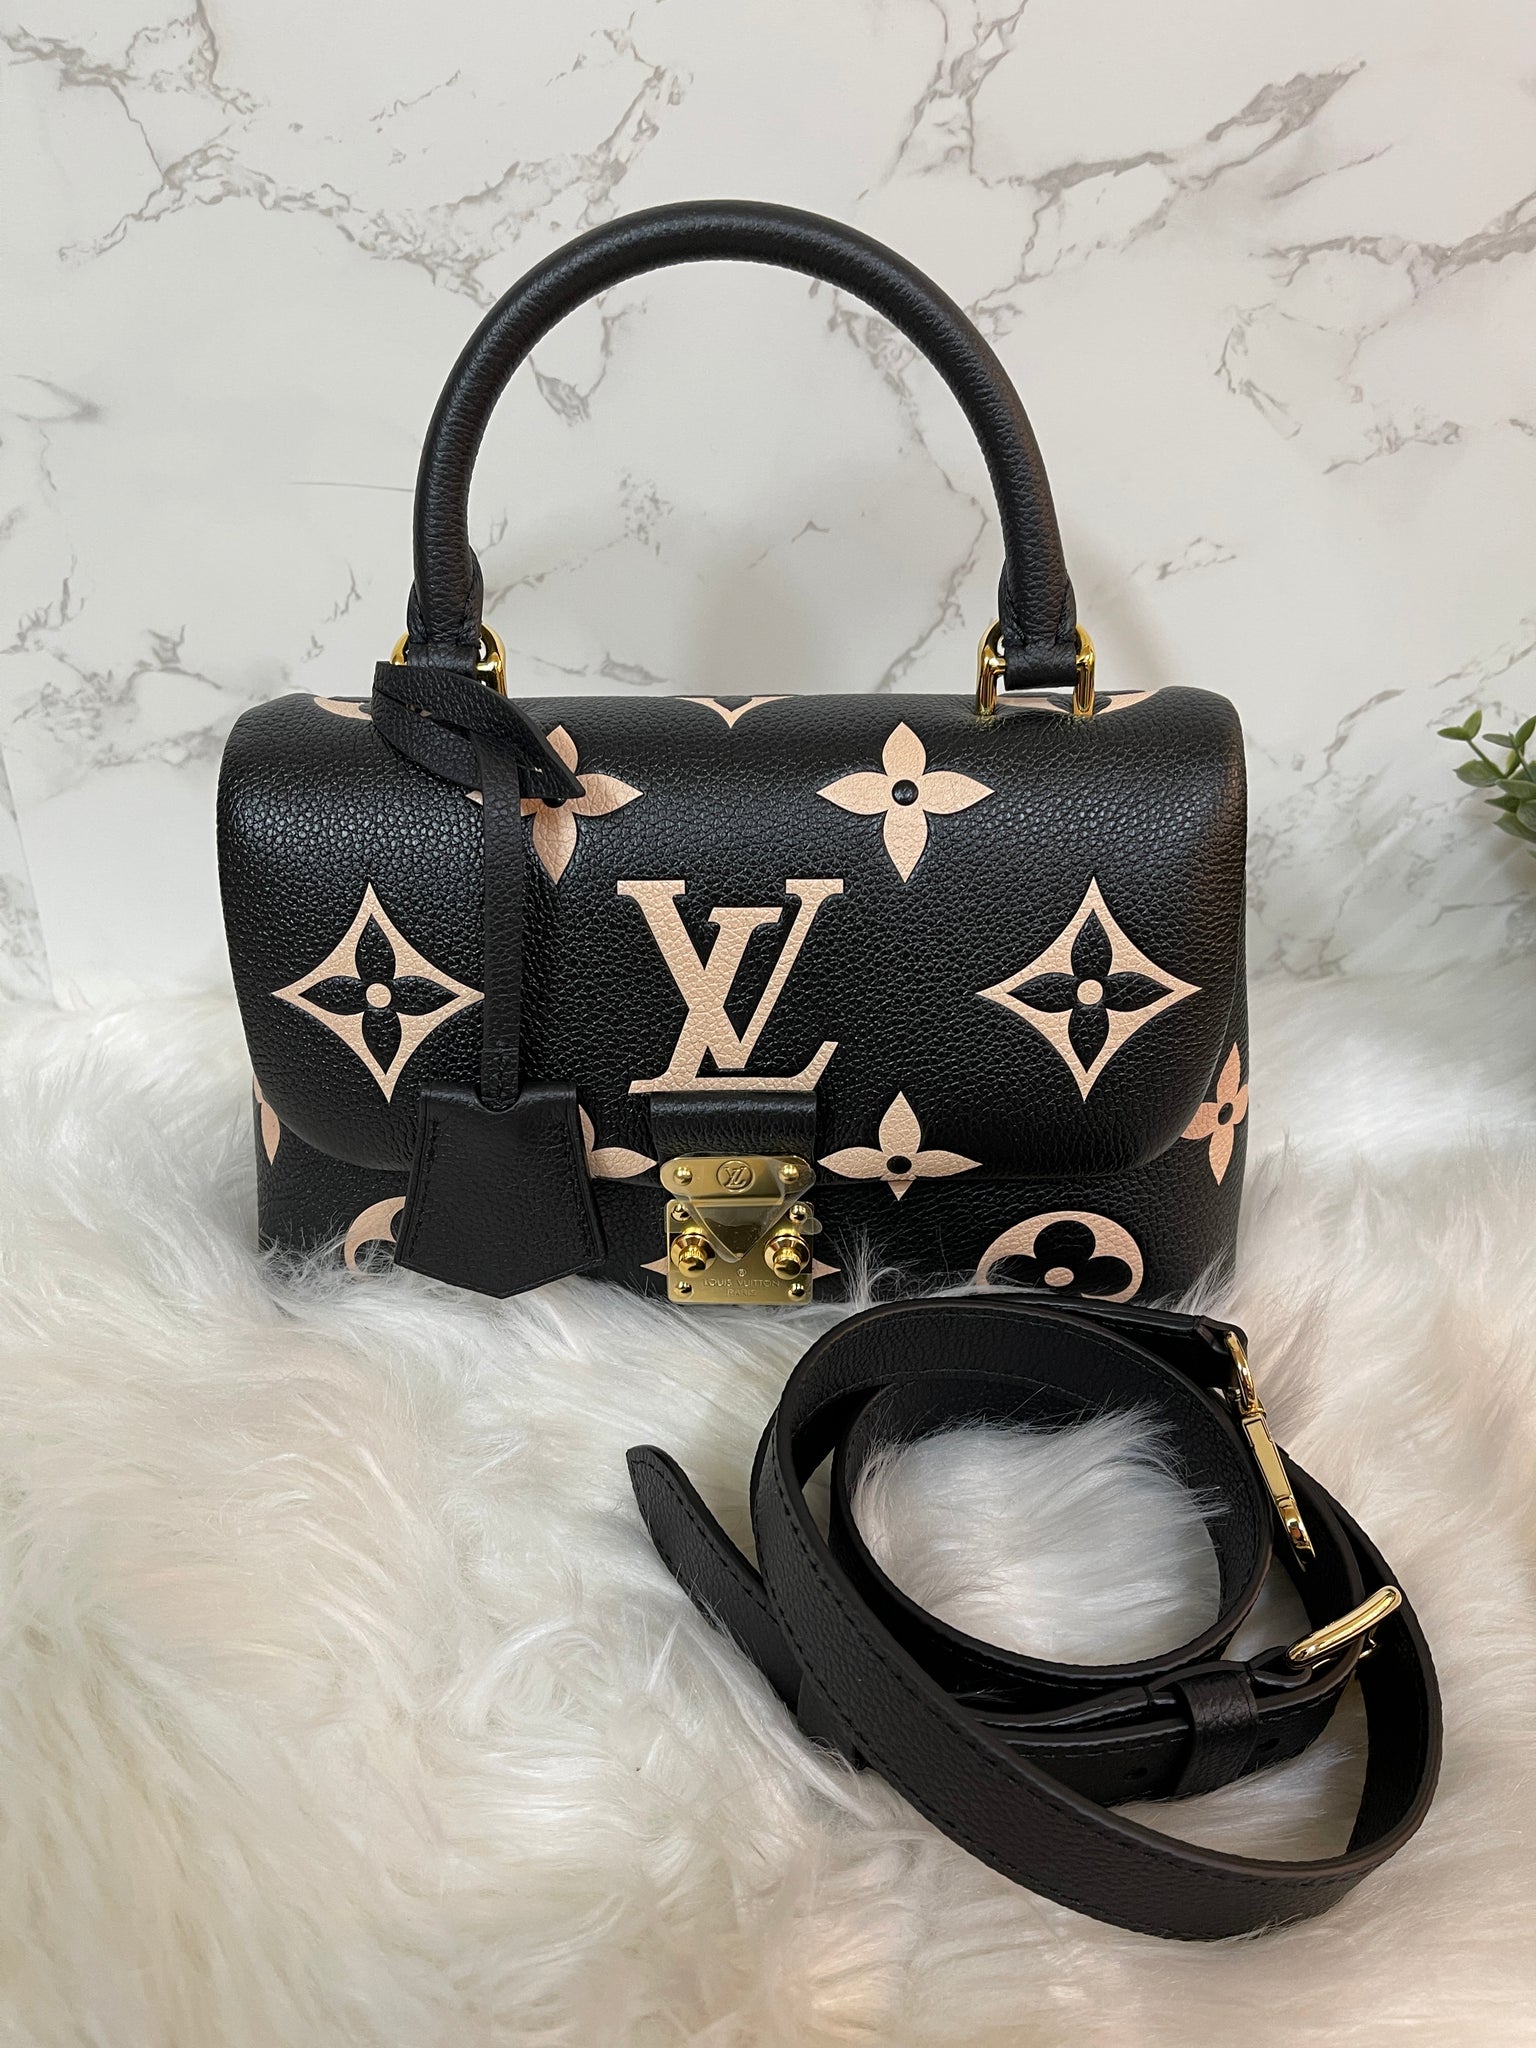 Louis Vuitton - Authenticated Madeleine Handbag - Leather Black For Woman, Good condition